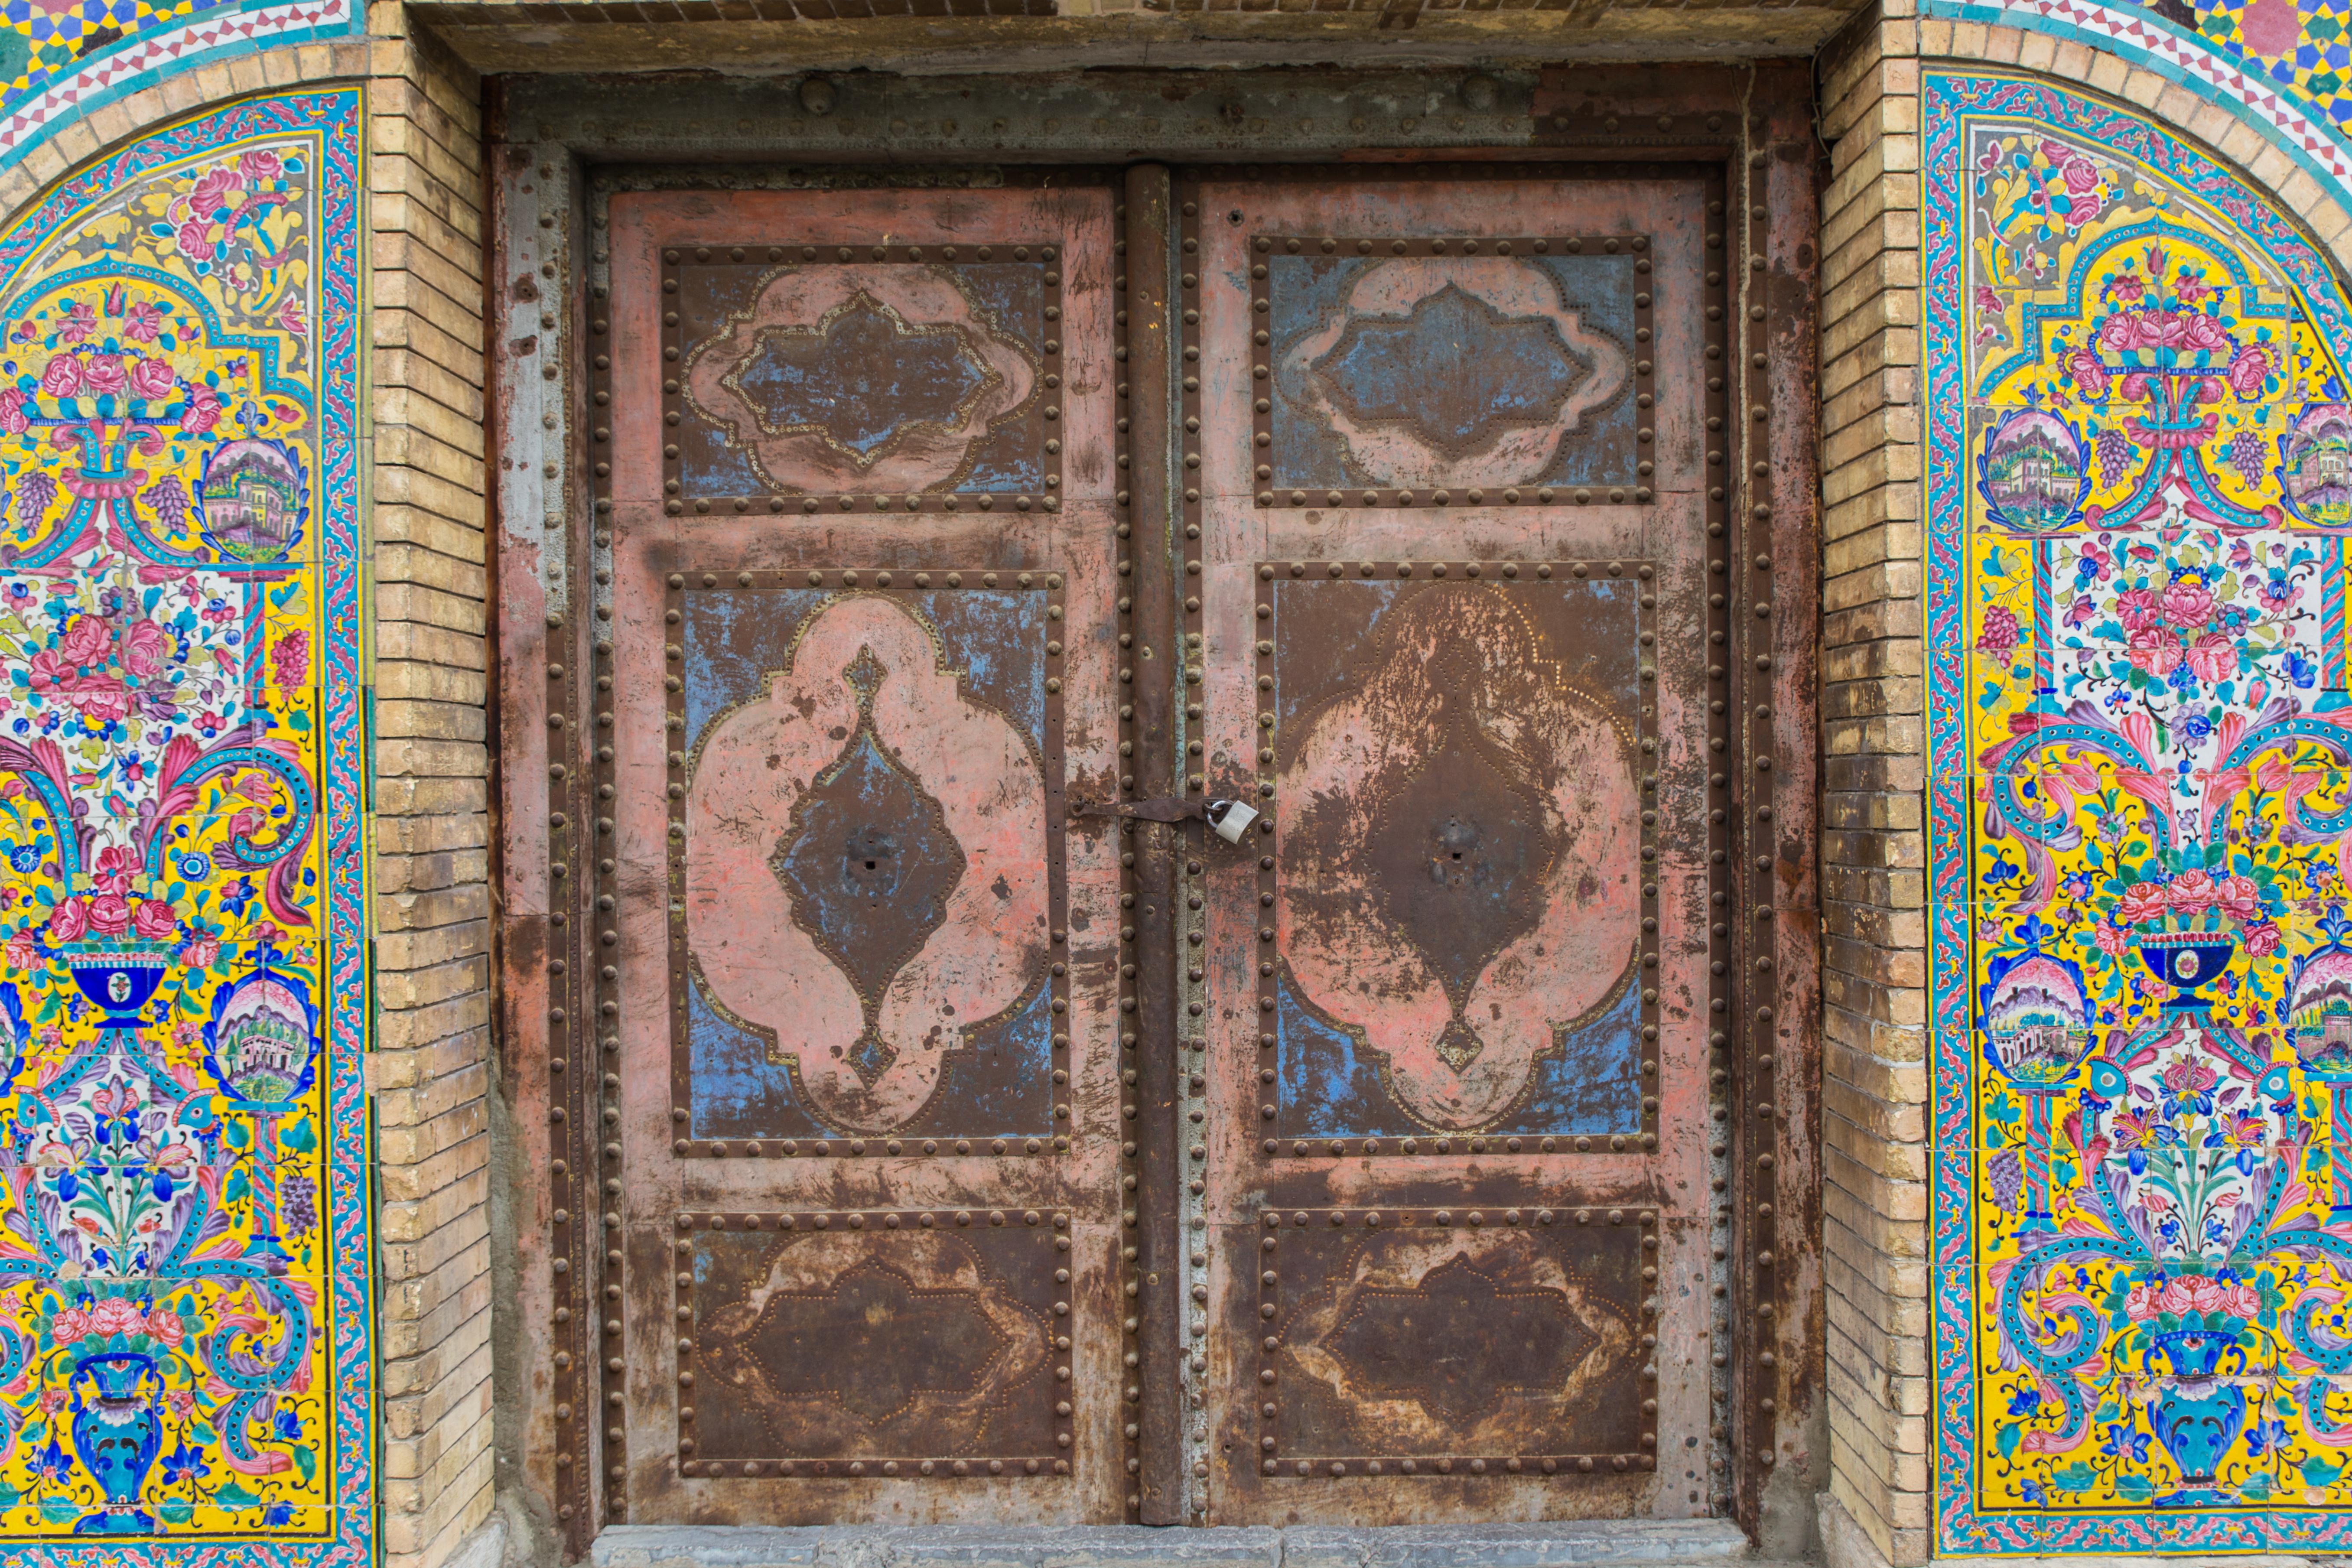 Intricate antique doors make an interesting contrast against the colorful tile